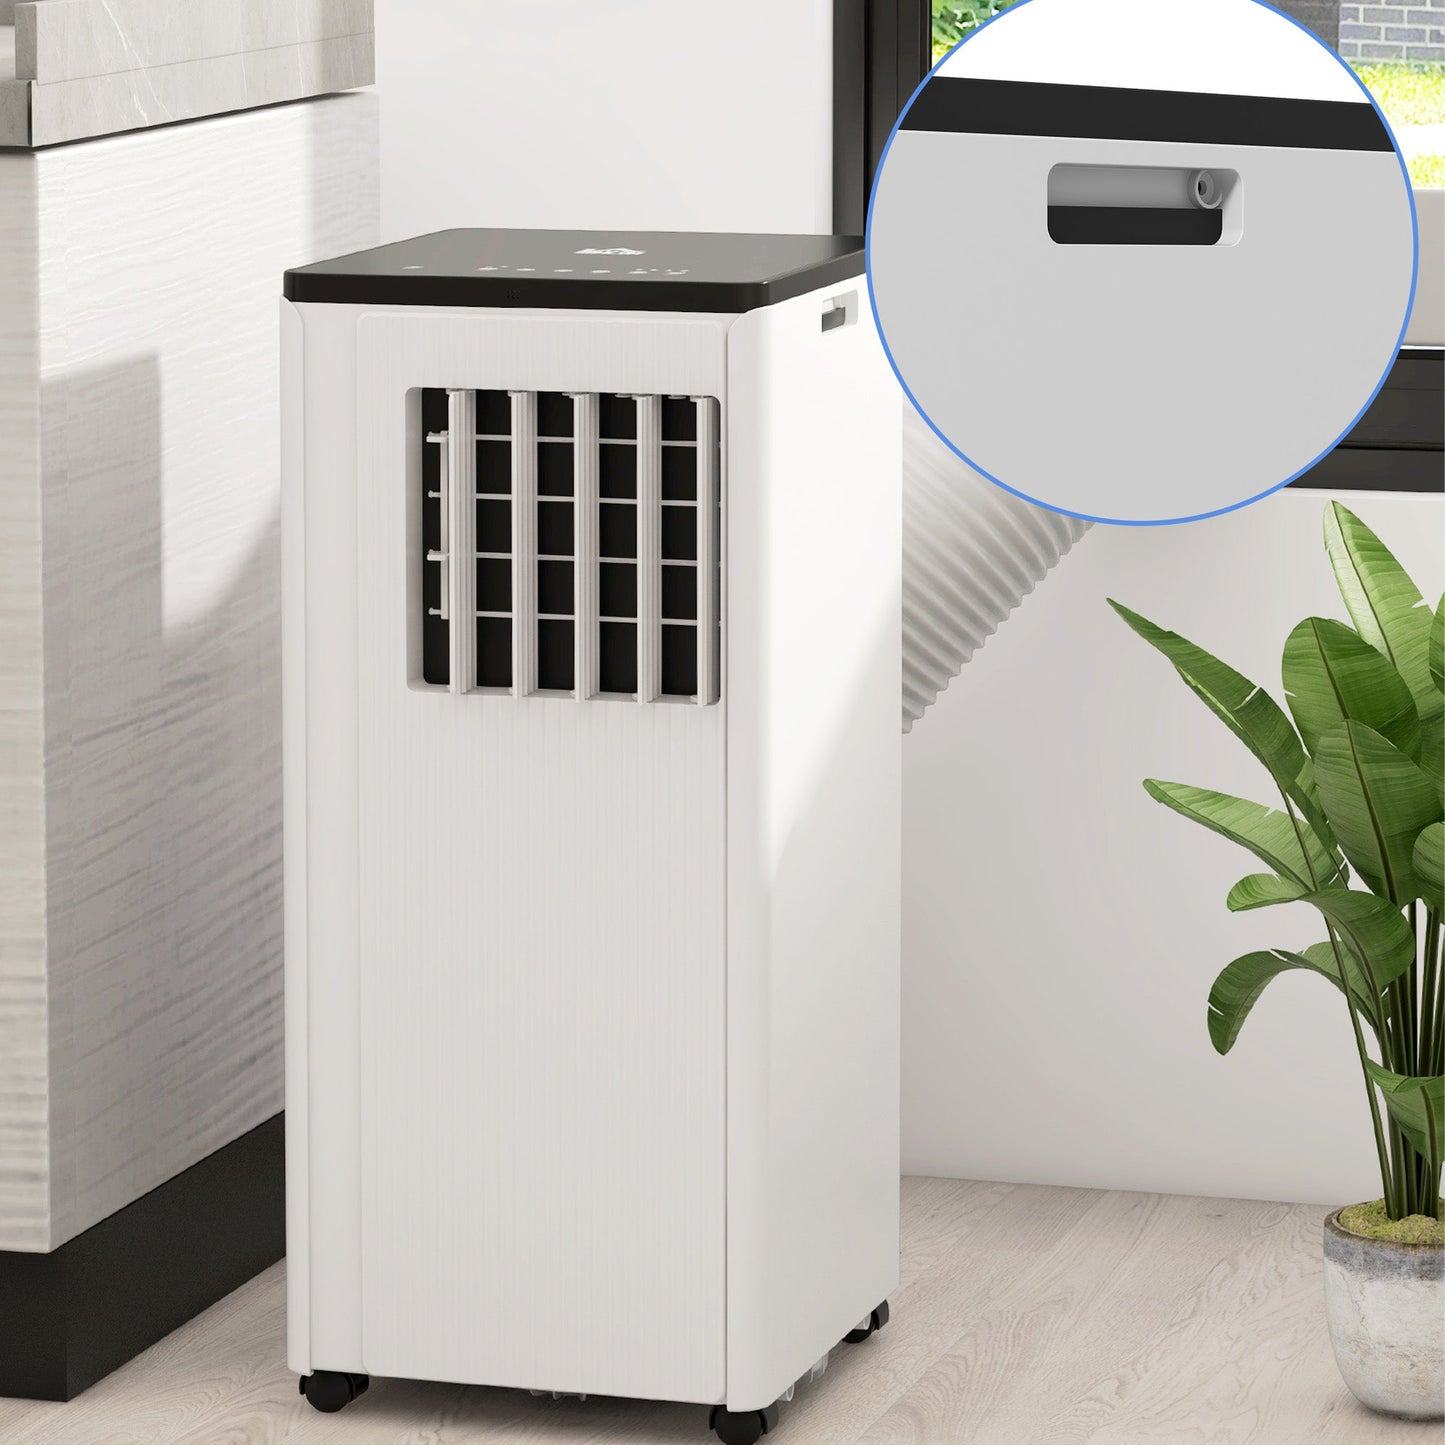 HOMCOM Smart WiFi Air Conditioner: 7000 BTU Cooling for 15m² Rooms, Dehumidifier & Fan Functions, 24-Hour Timer, White